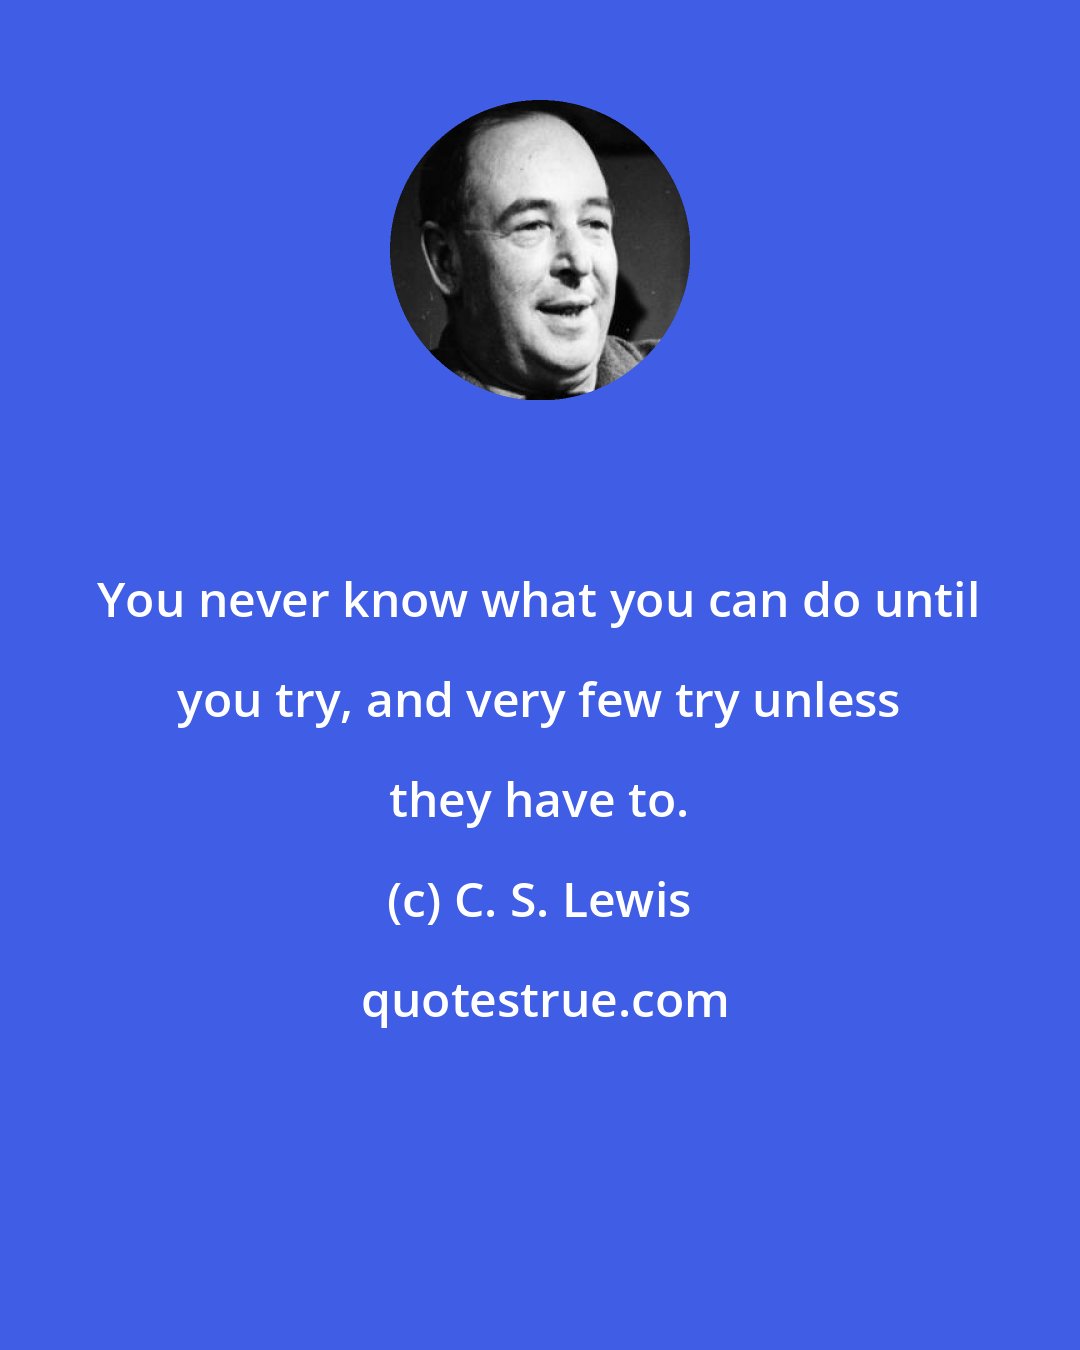 C. S. Lewis: You never know what you can do until you try, and very few try unless they have to.